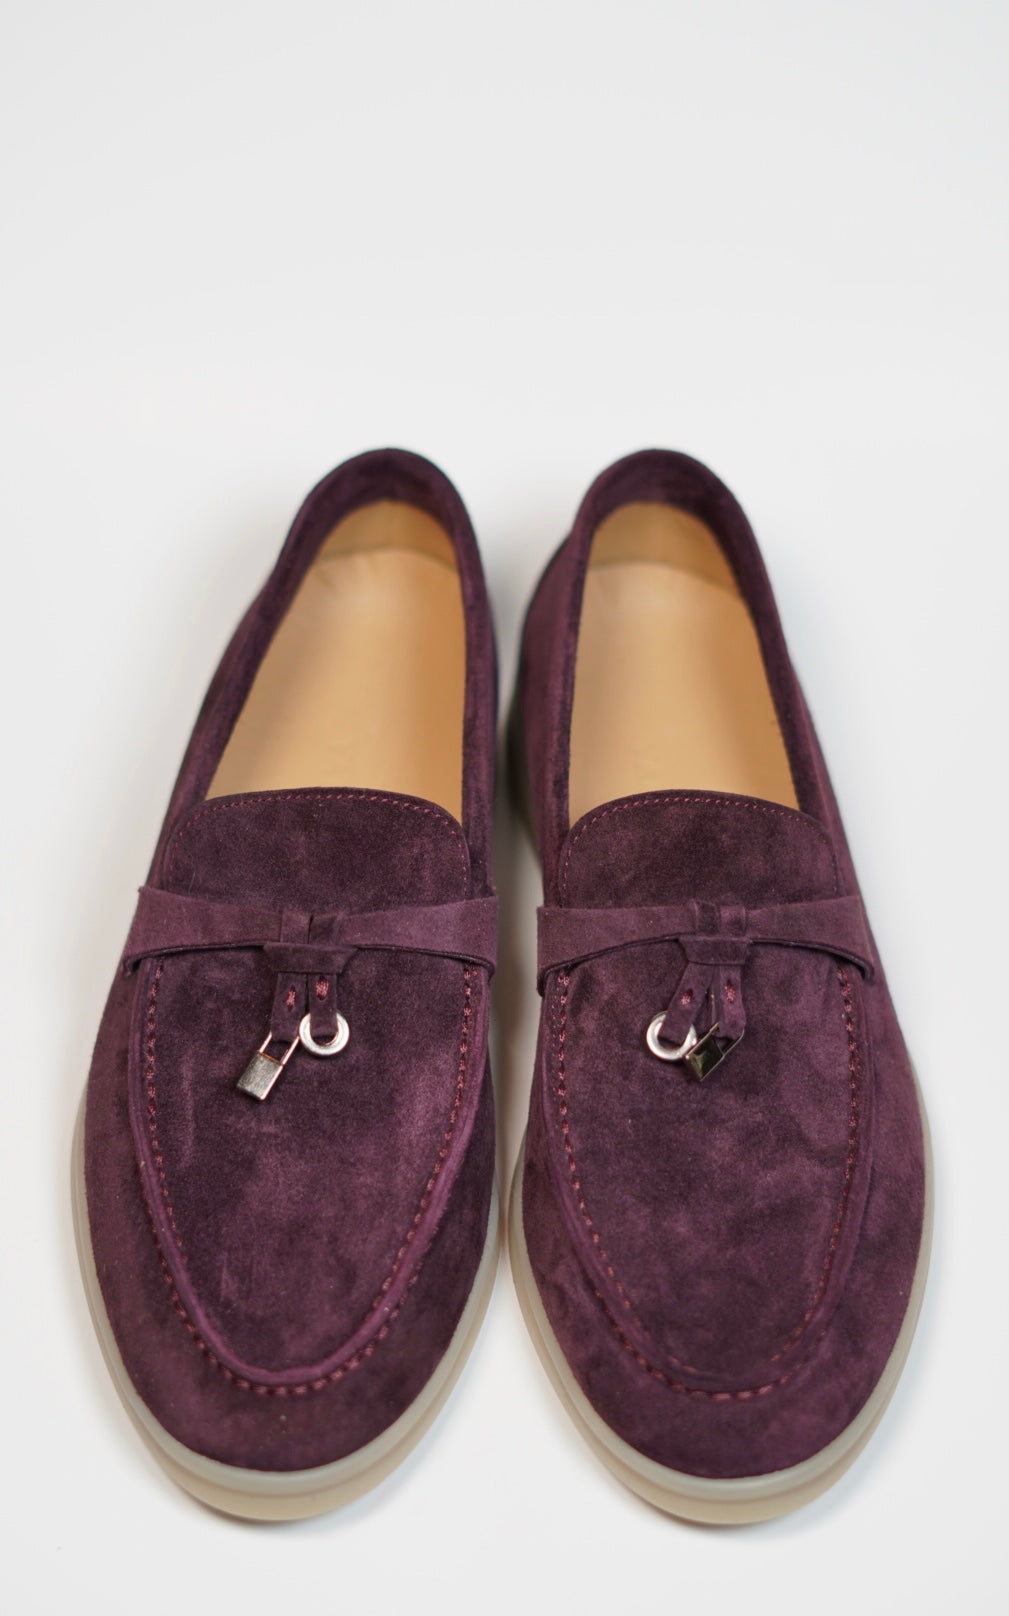 Women's Genuine Suede Loafers Moccasins Mulberry